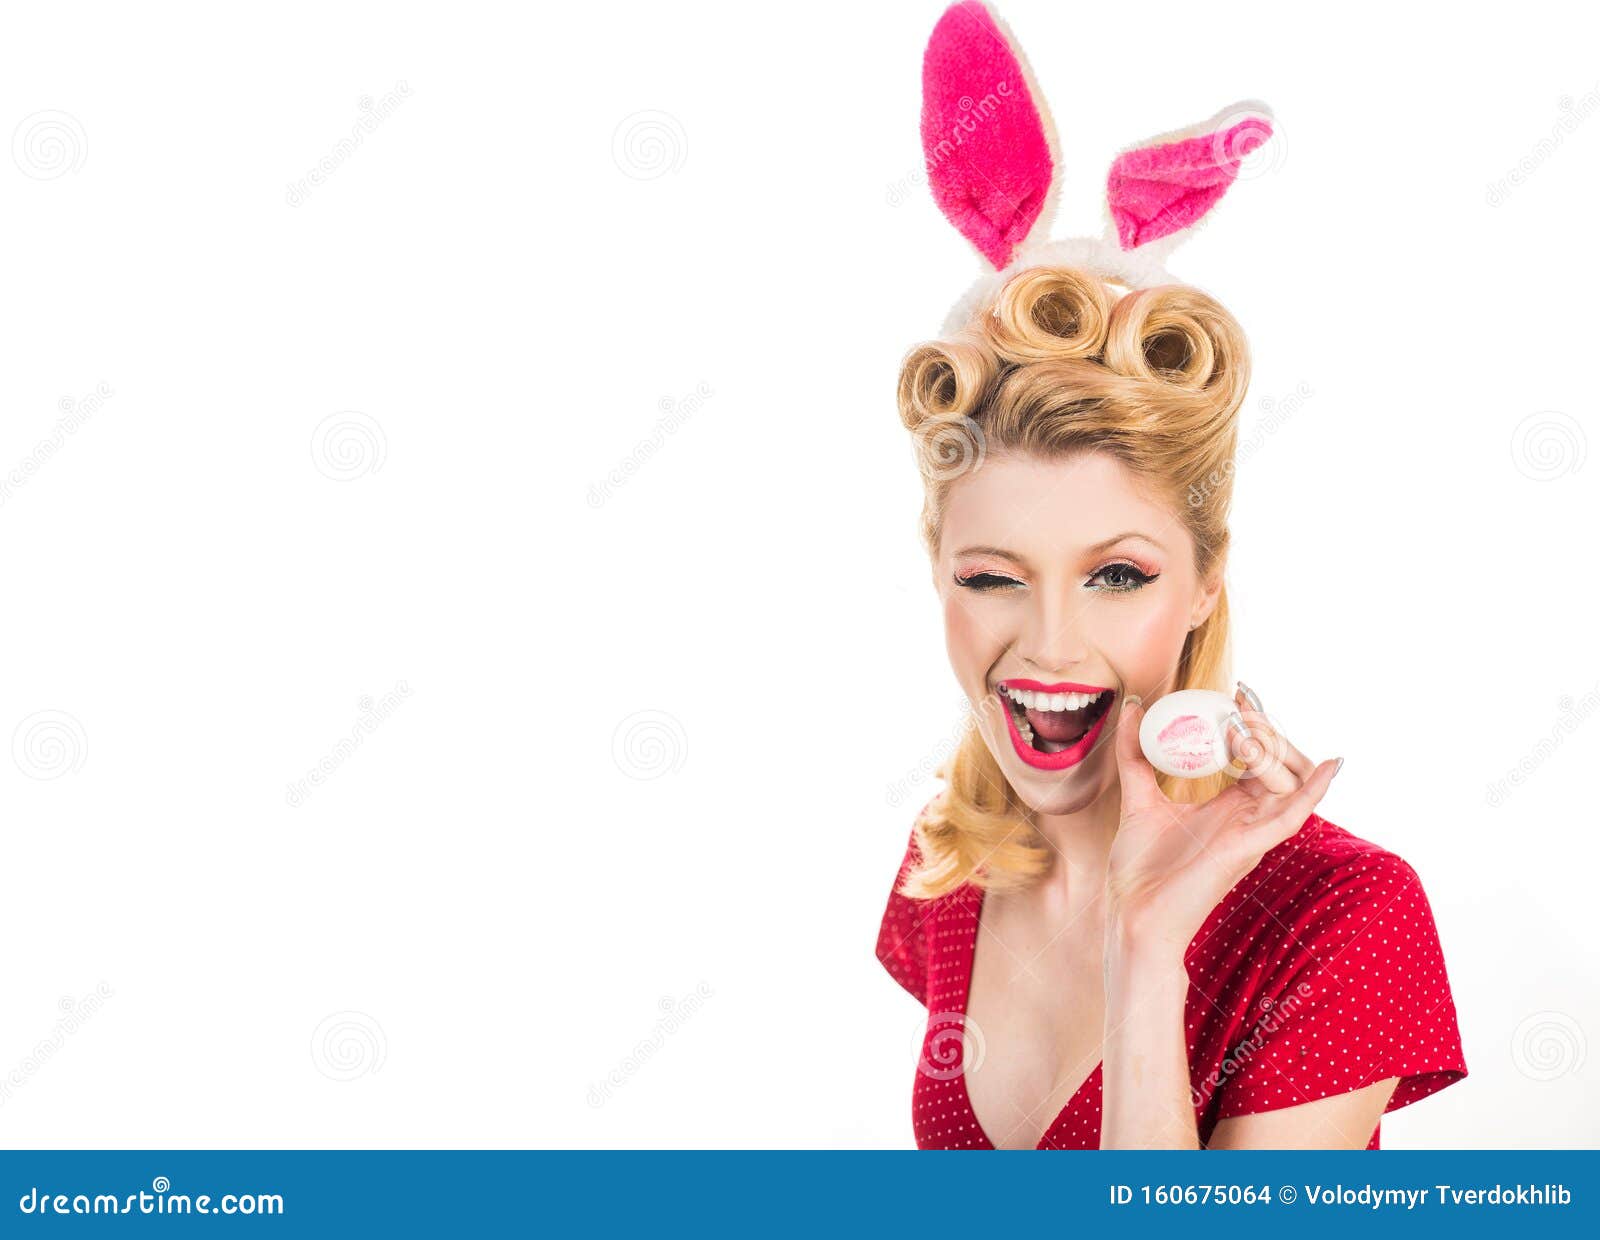 Easter Cards Model Dressed In Costume Bunny Pin Up Easter Pinup Woman In Bunny Ears With Easter Egg Lovely Stock Photo Image Of Charming Full 160675064